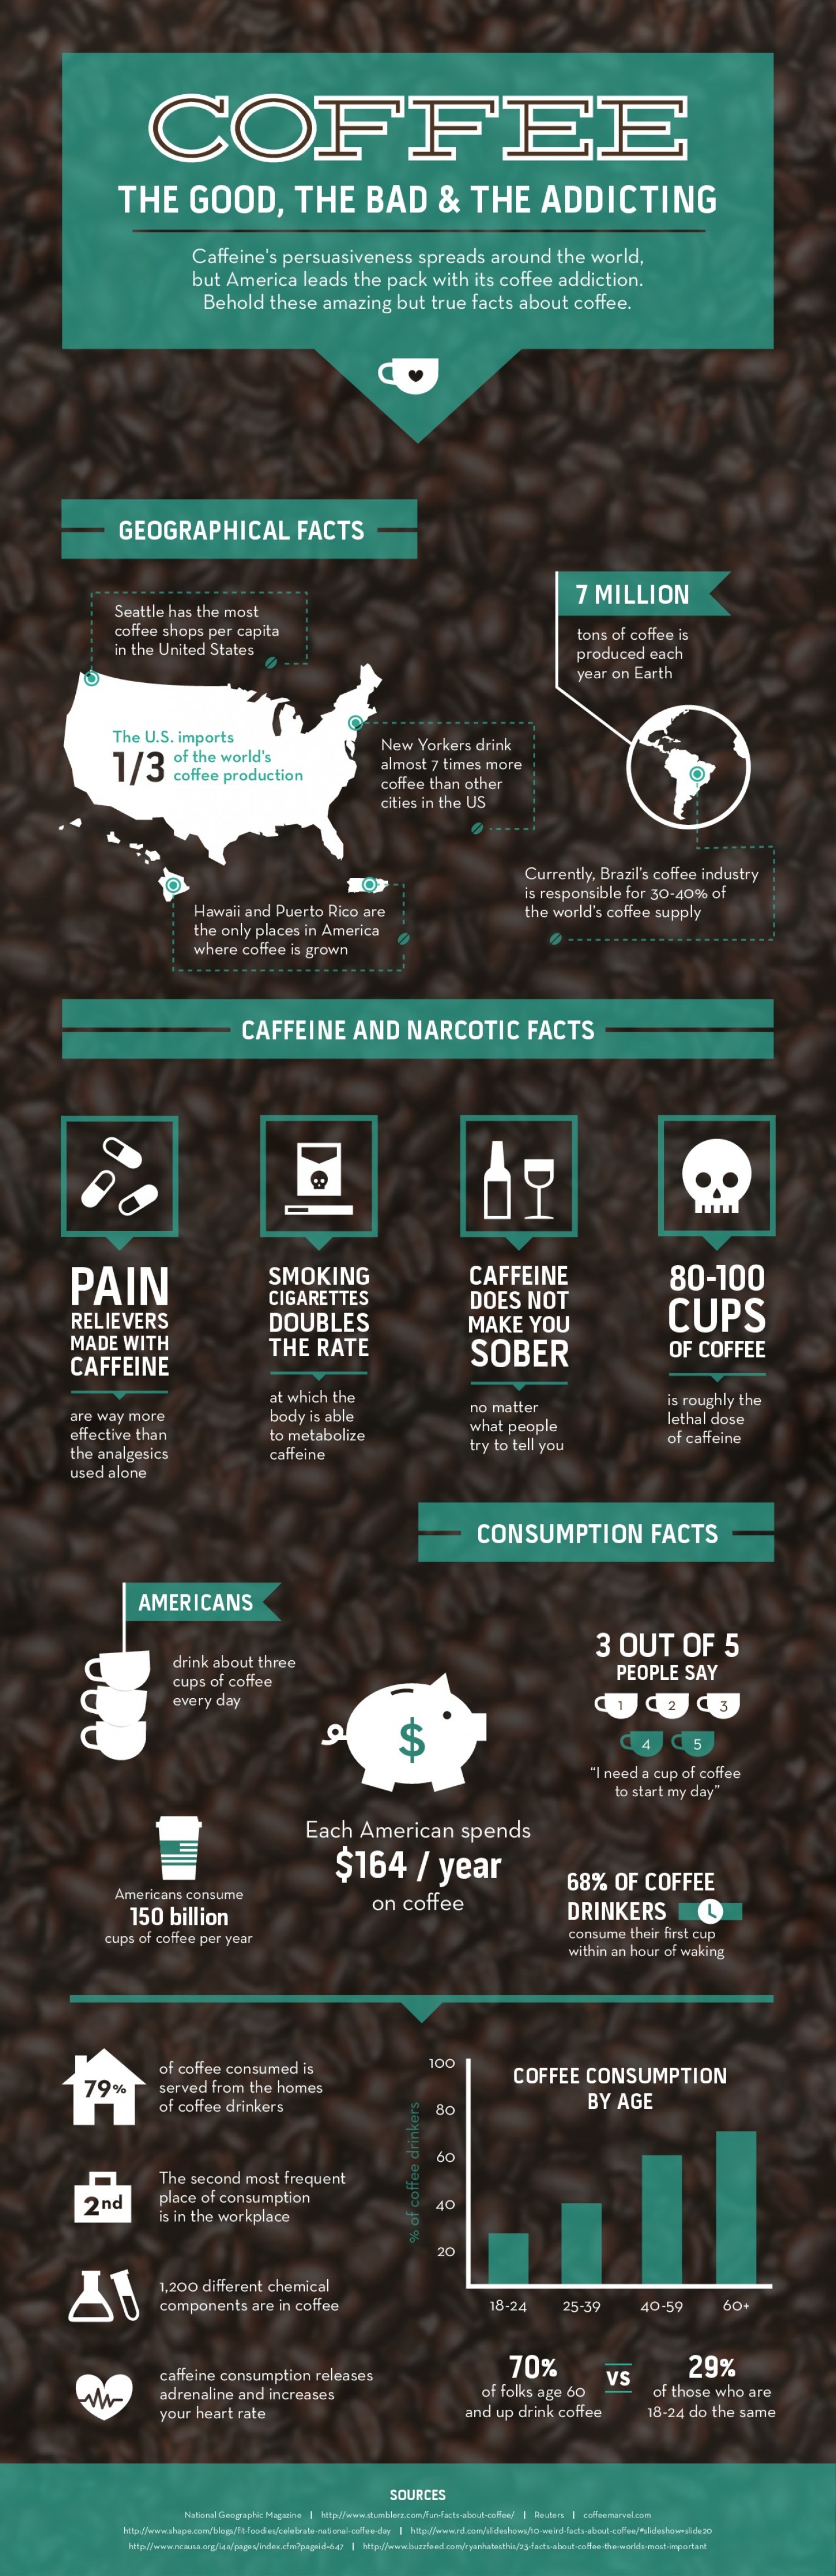 16 Facts About Caffeine Addiction Infographic